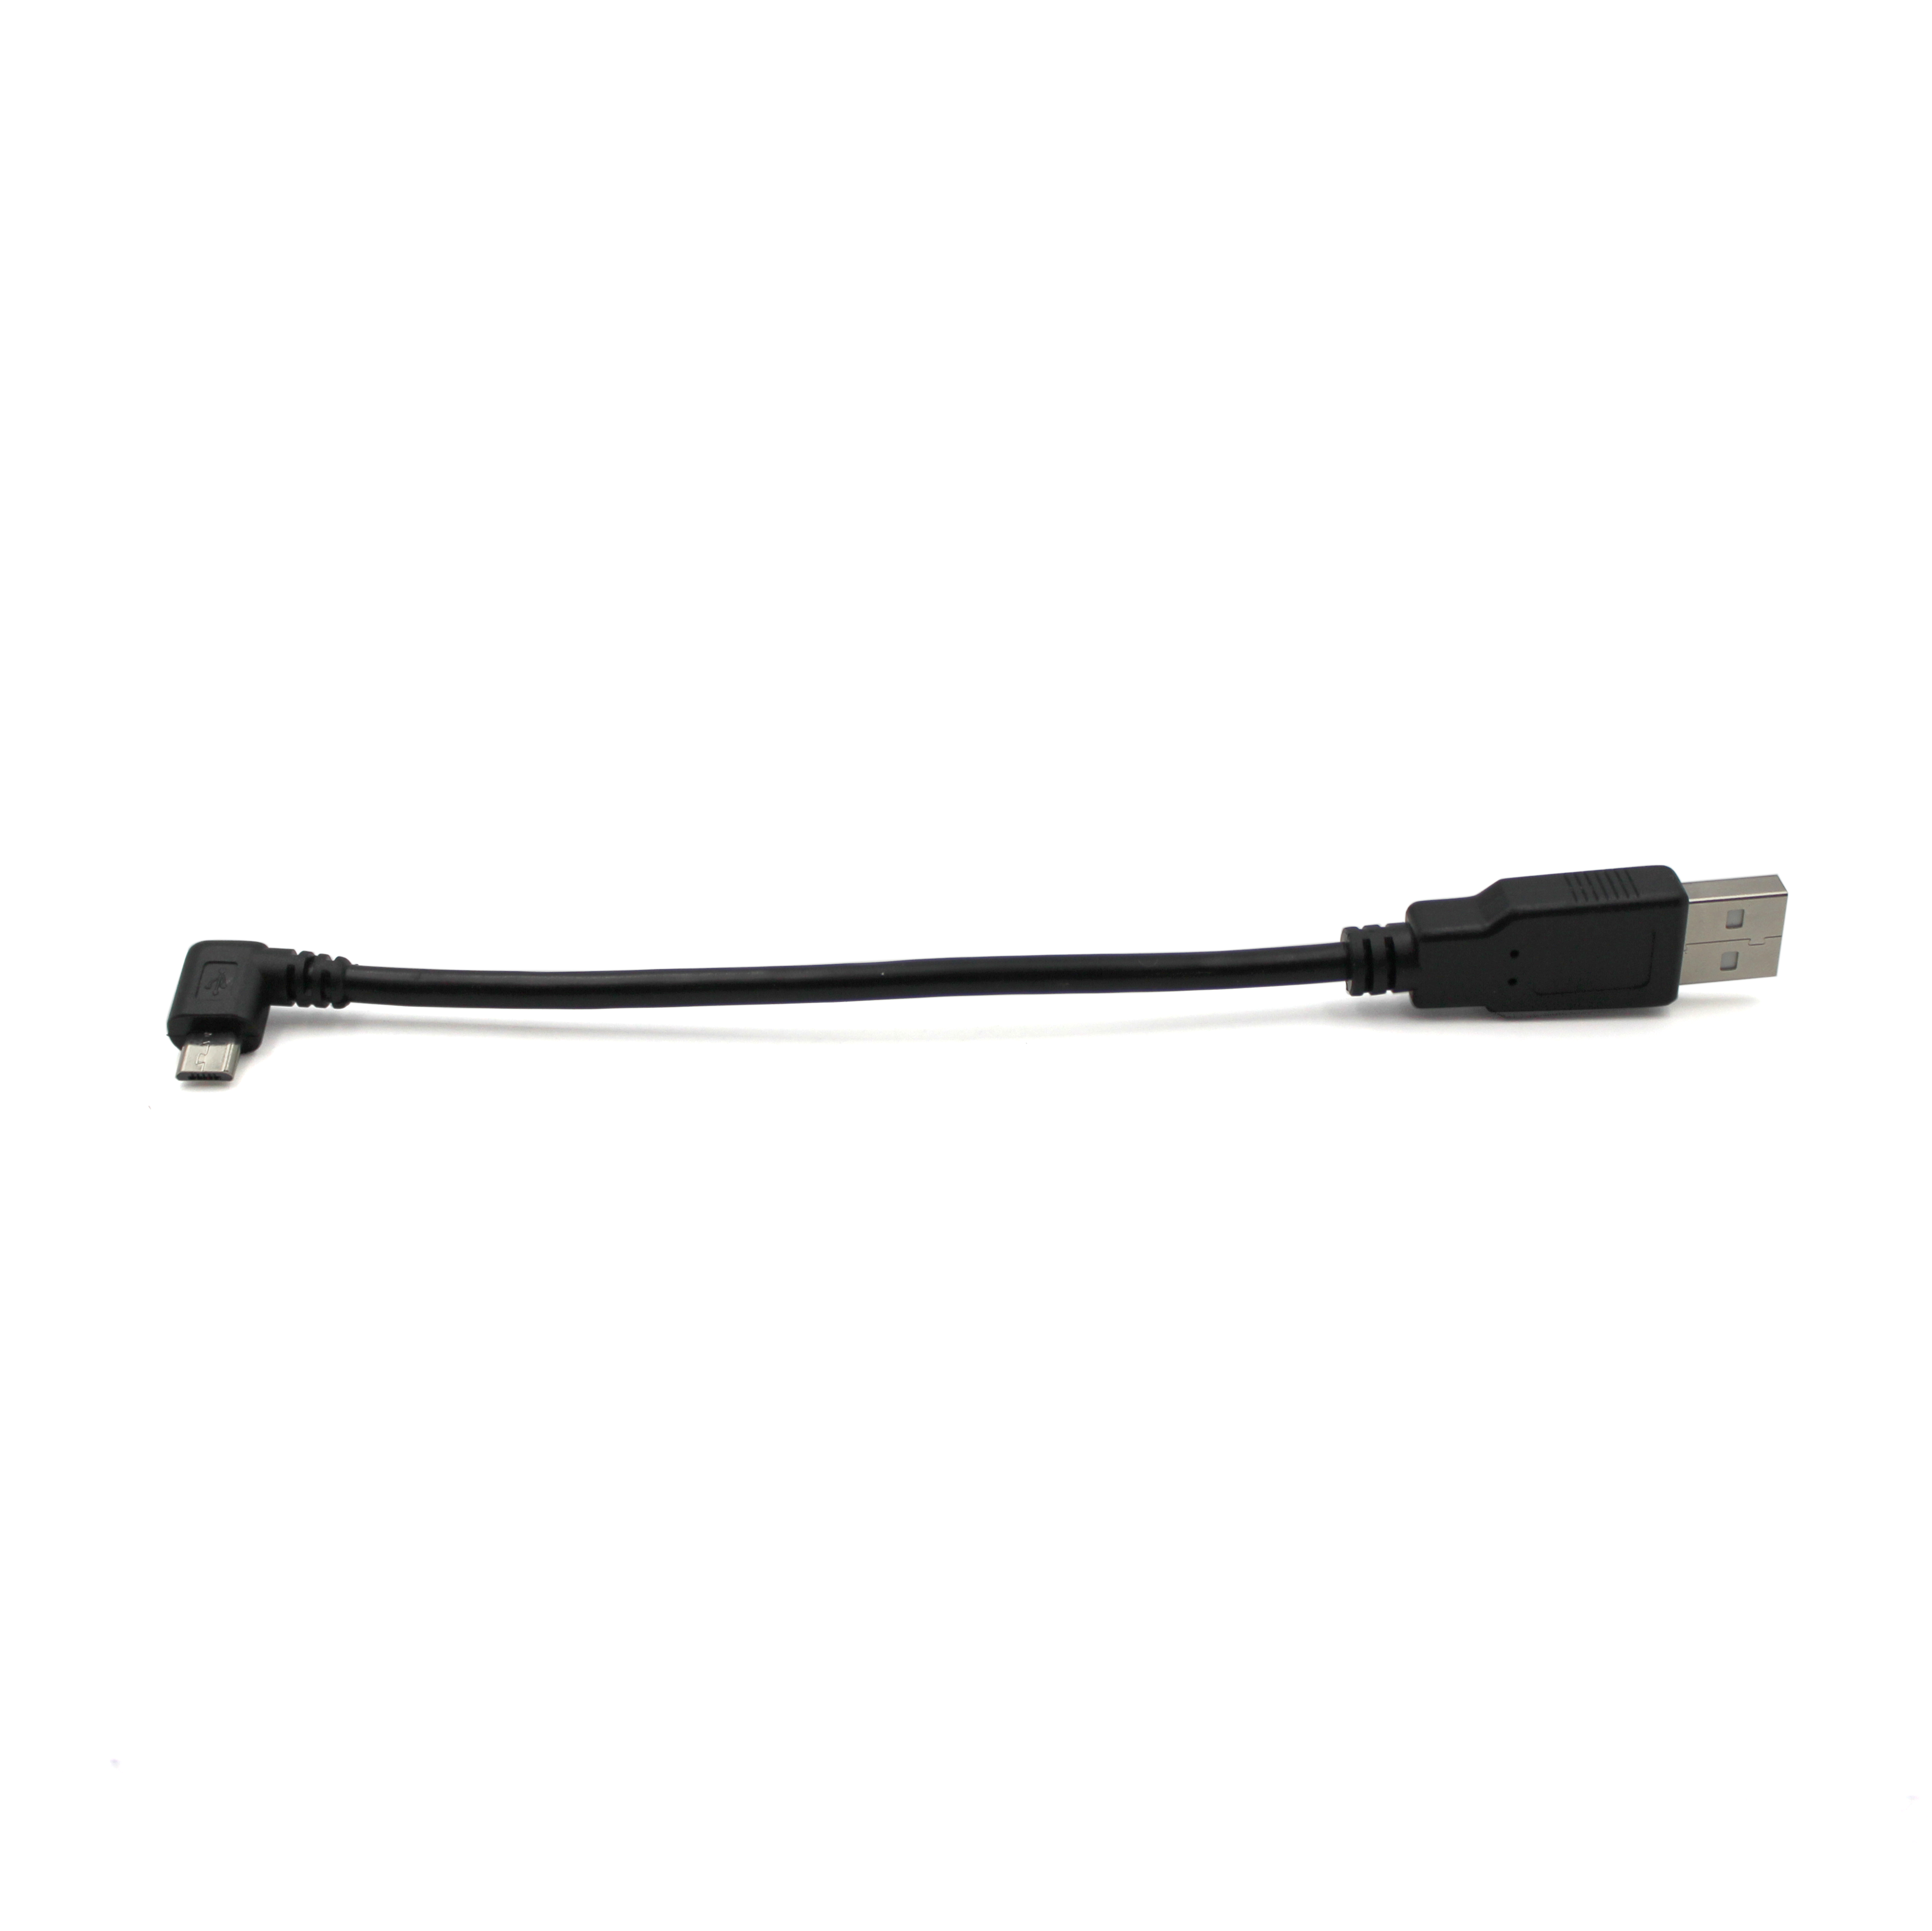 small usb cable